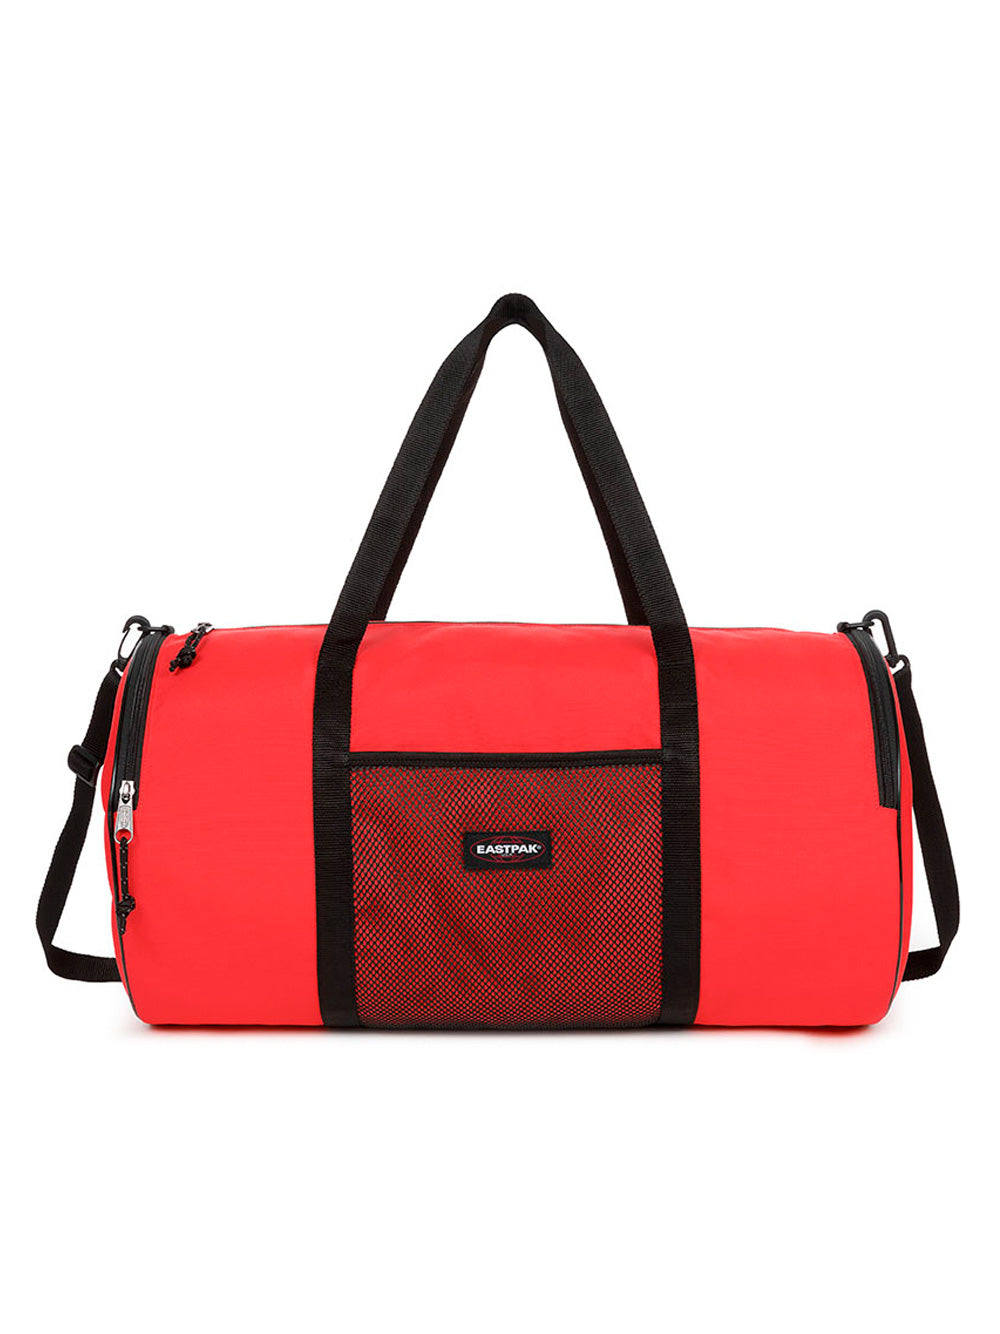 Large Red Duffle Bag